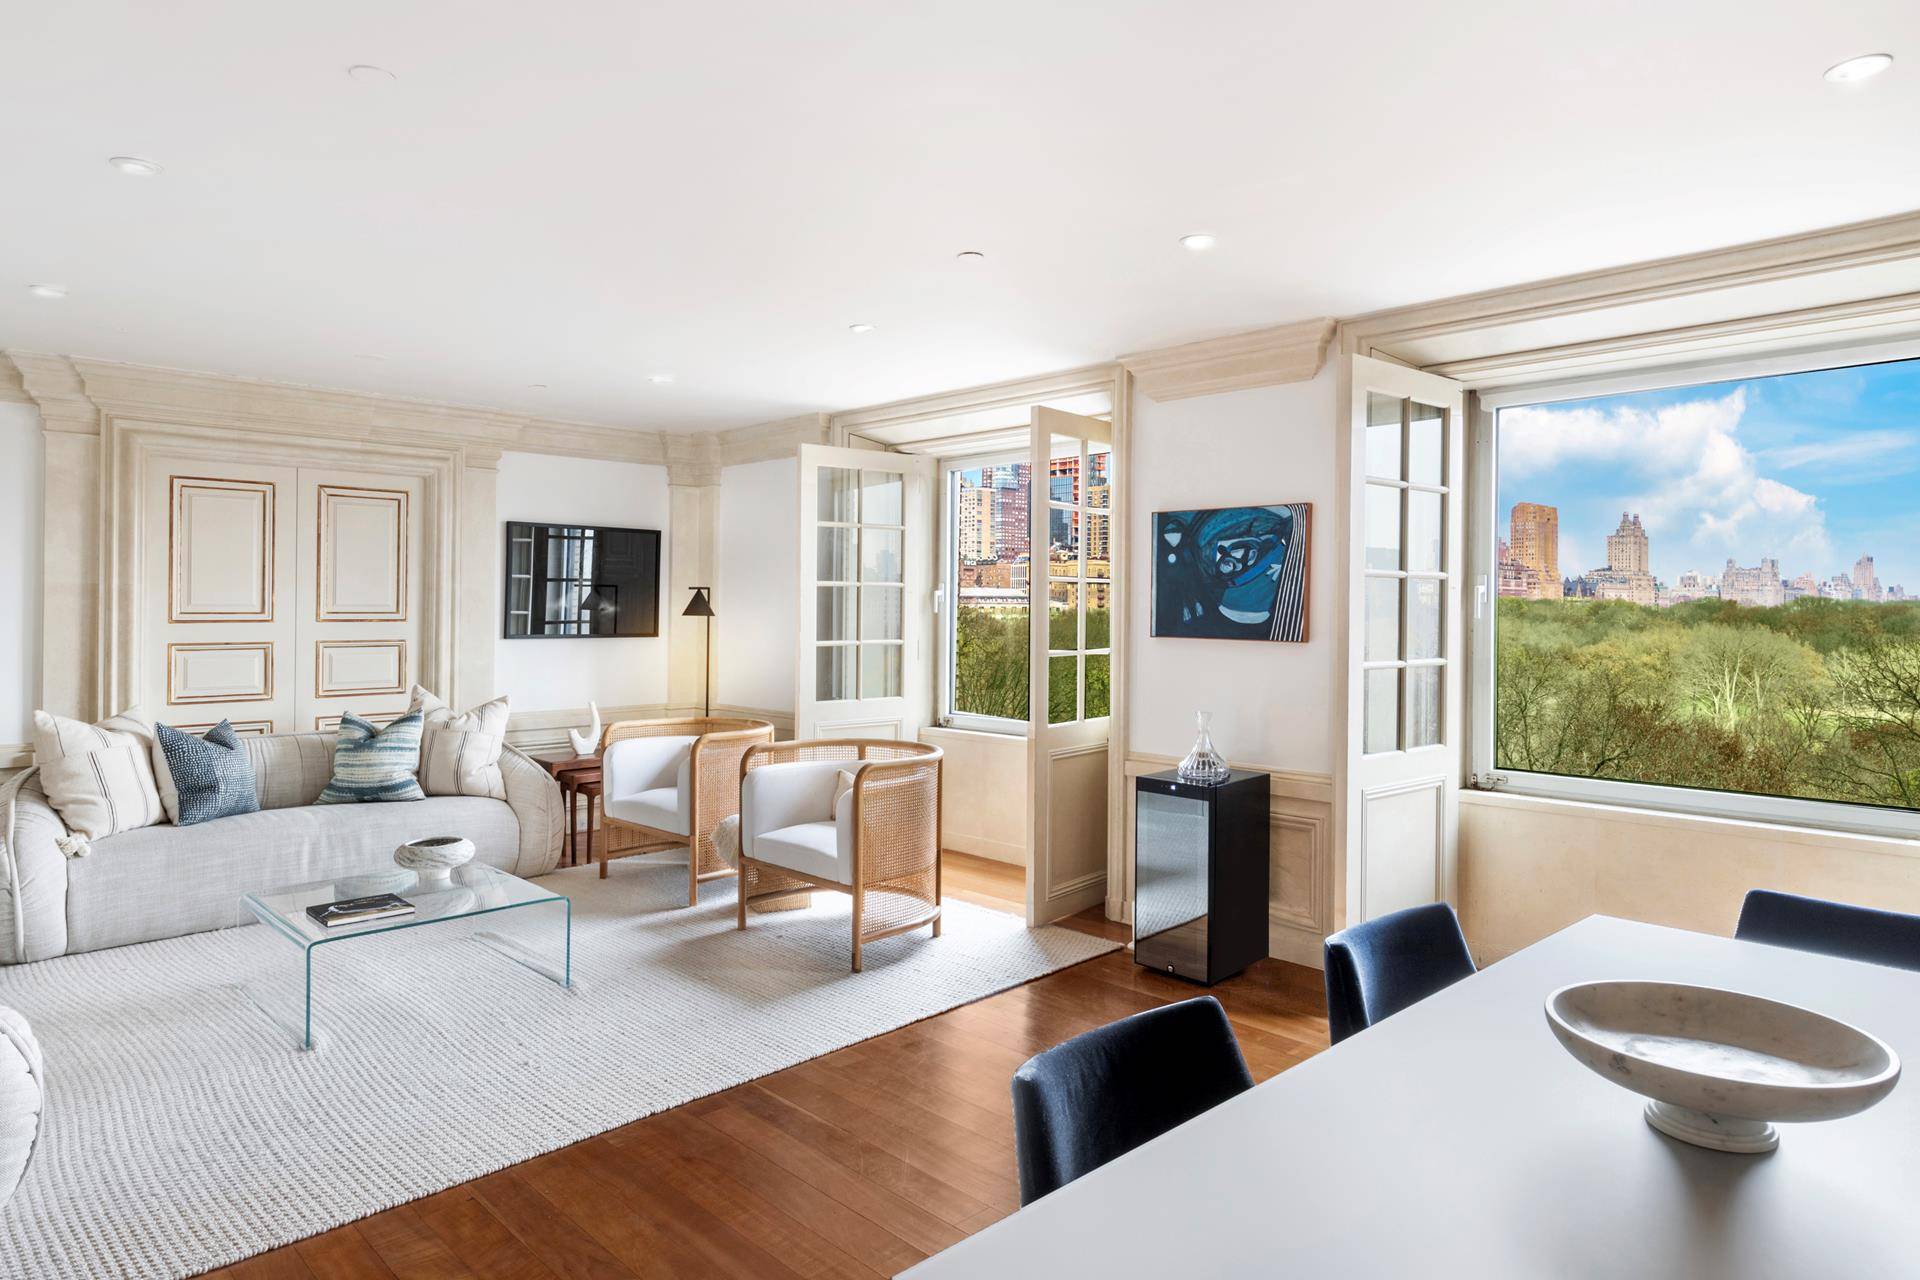 FURNISHED SHORT TERM SUMMER RENTAL JUNE 1st to AUG 31st Your dream has come true, this Central Park front at the JW Marriott Essex House enjoys over 40 linear feet ...